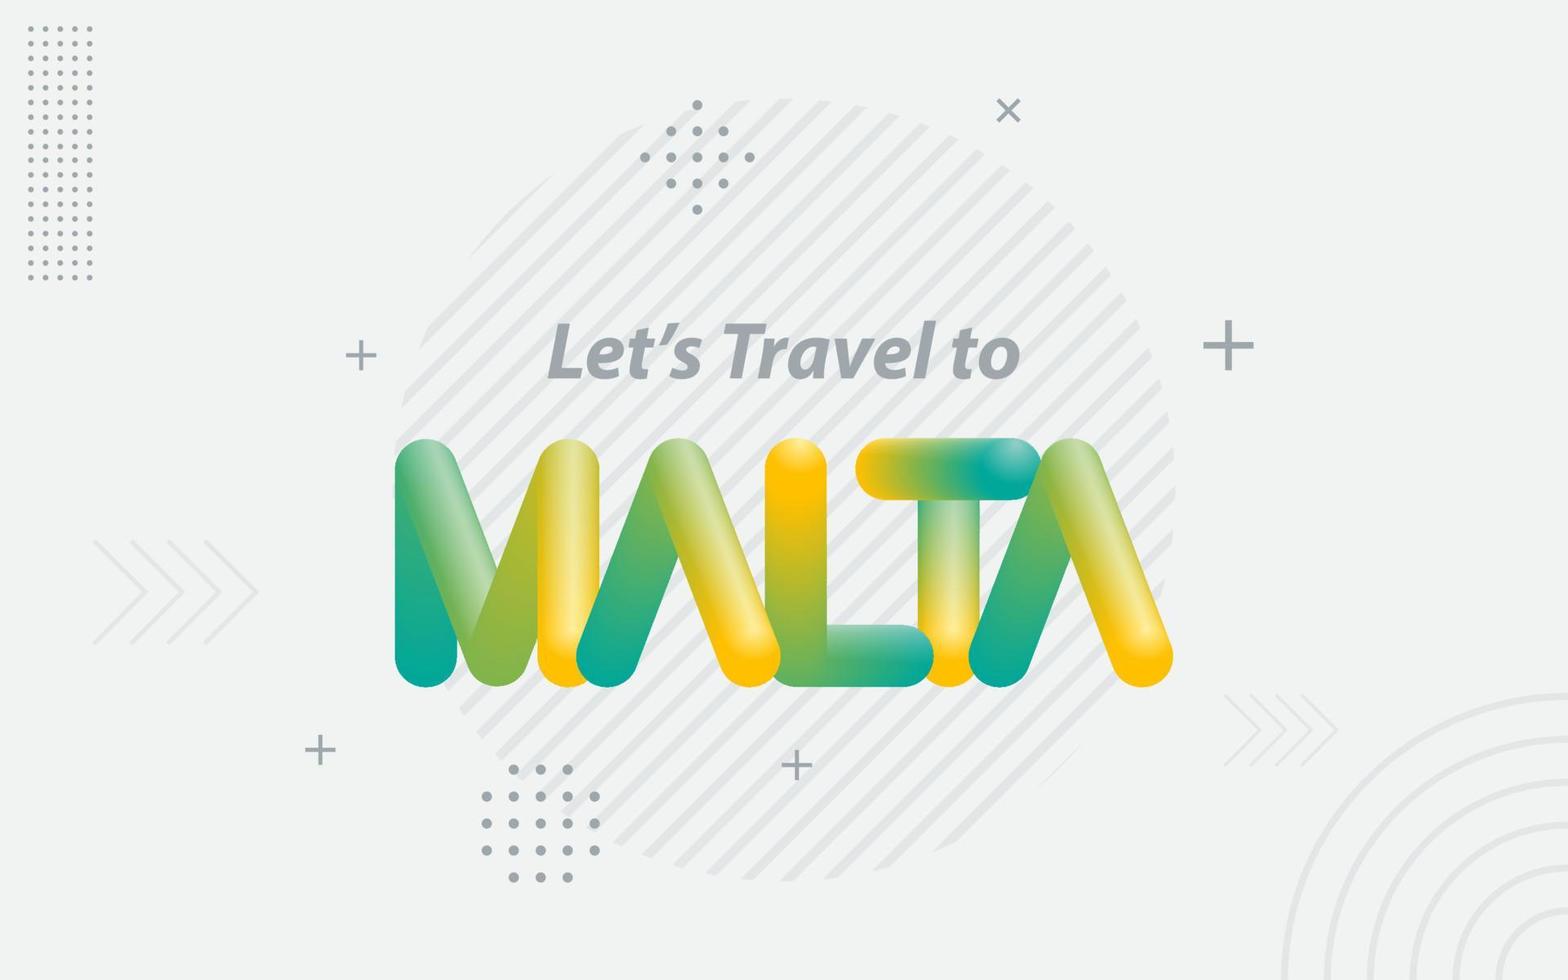 Lets Travel to Malta. Creative Typography with 3d Blend effect vector